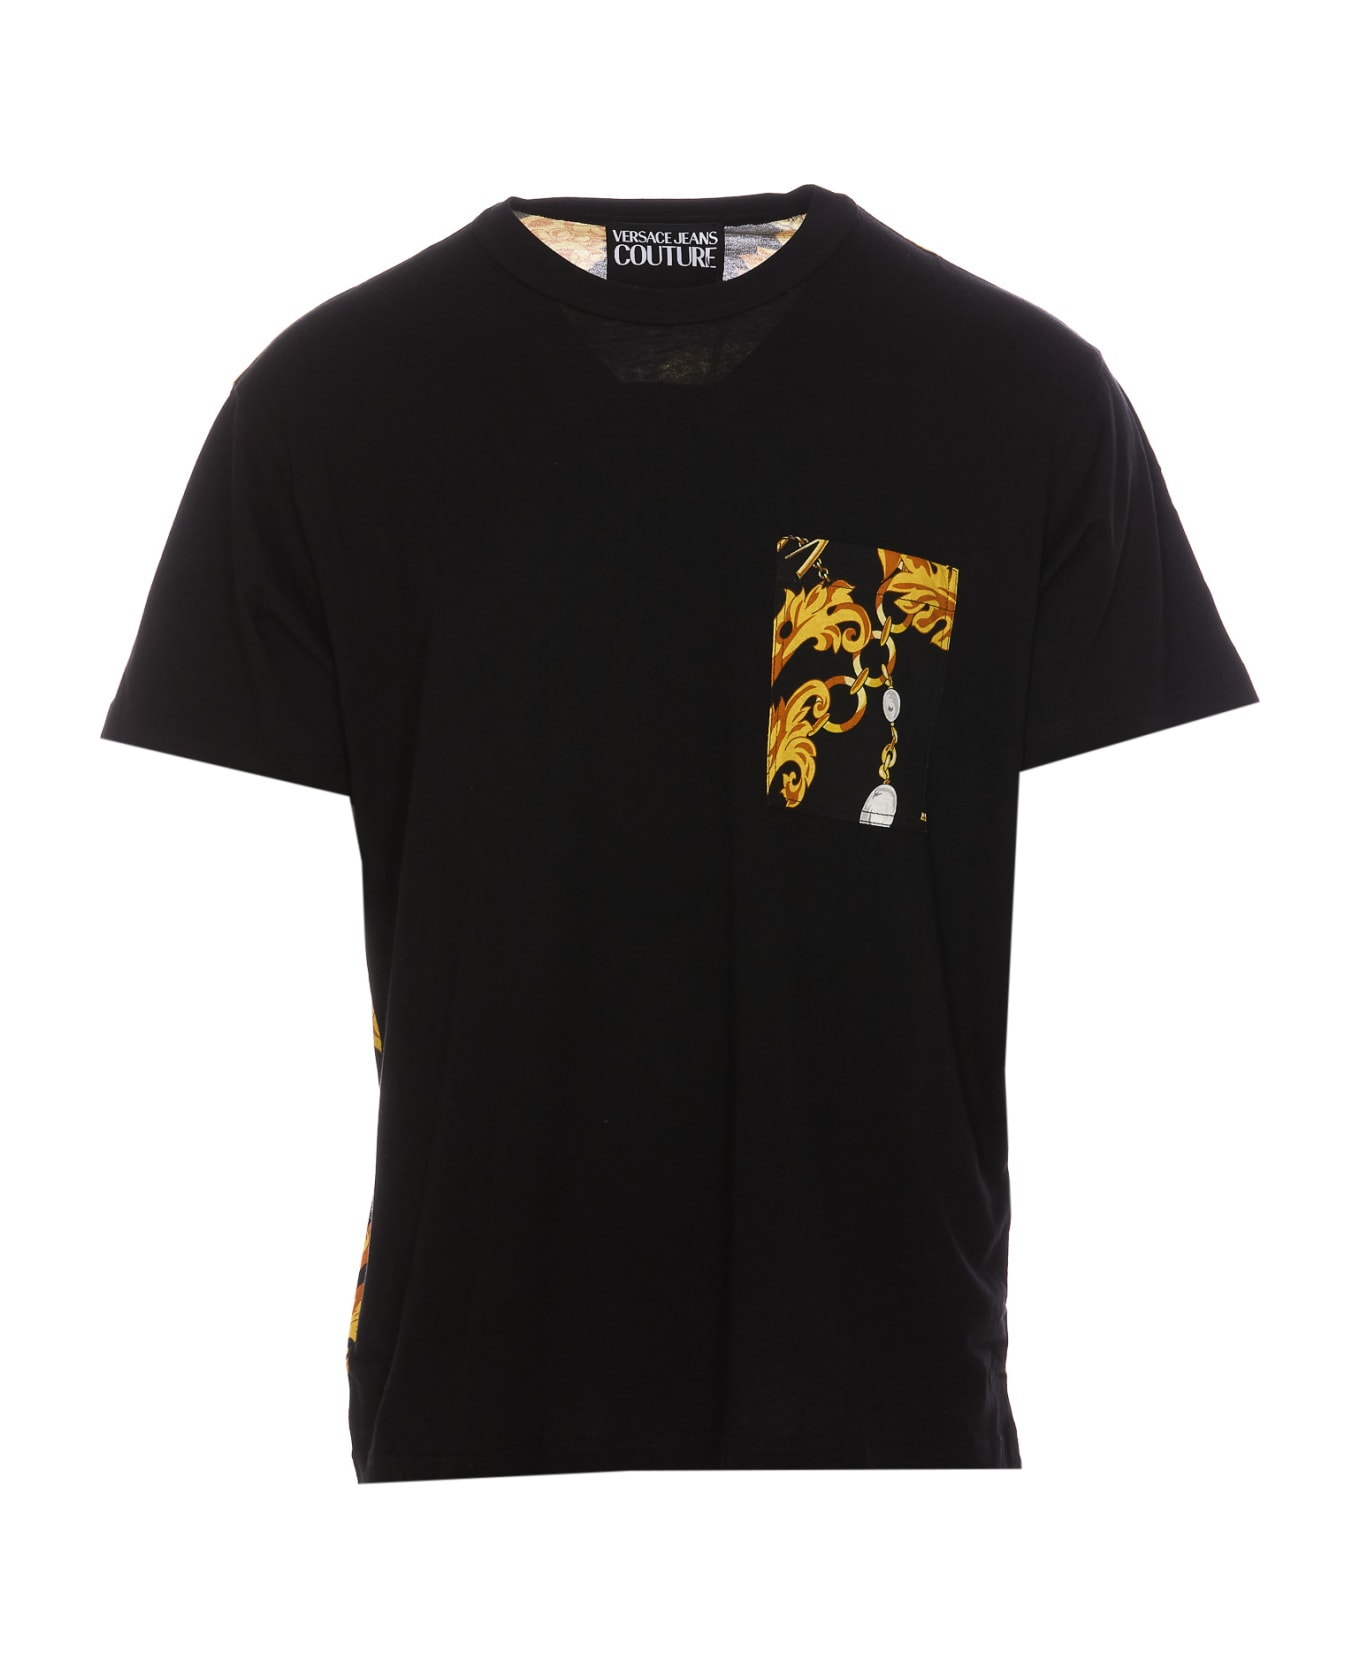 Versace Jeans Couture Chain Couture Print T-shirt - Black Gold